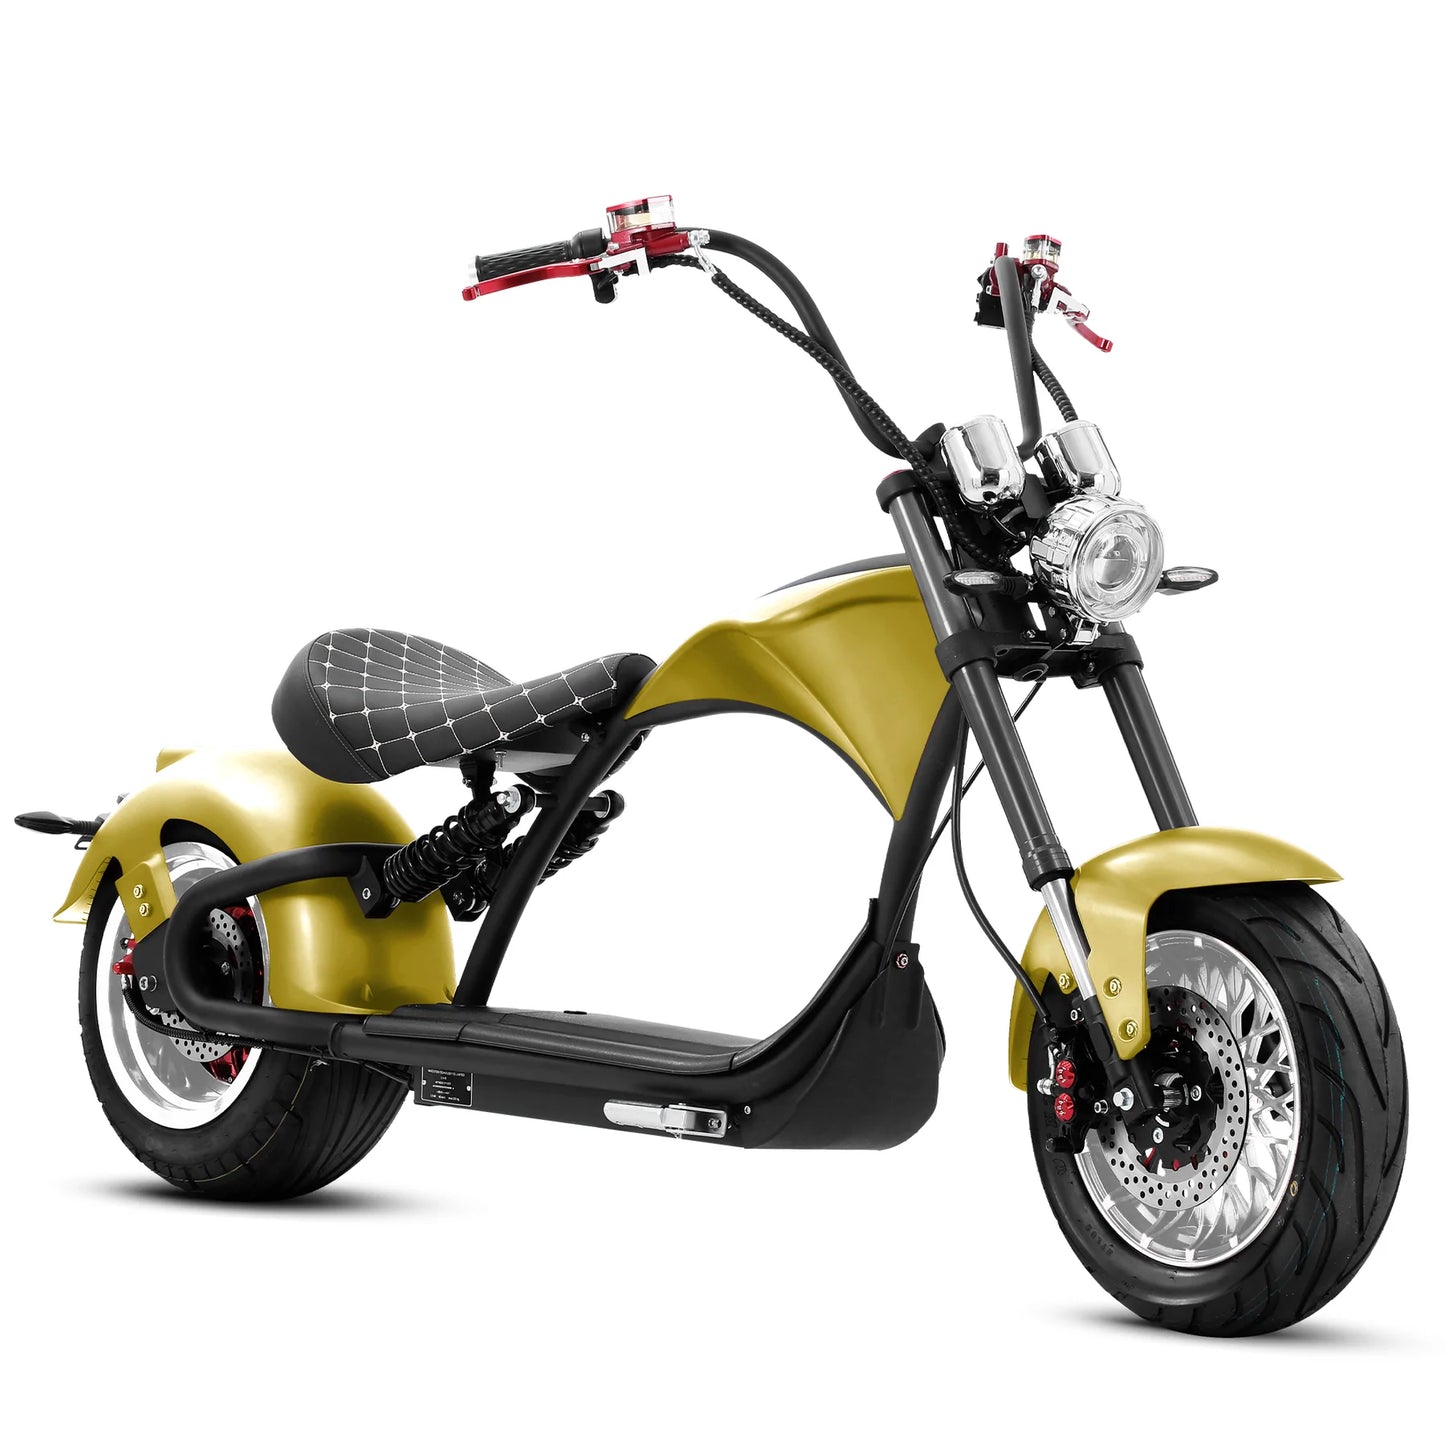 Eahora Emars M1P Electric Scooter - Old Gold | Bike Lover USA